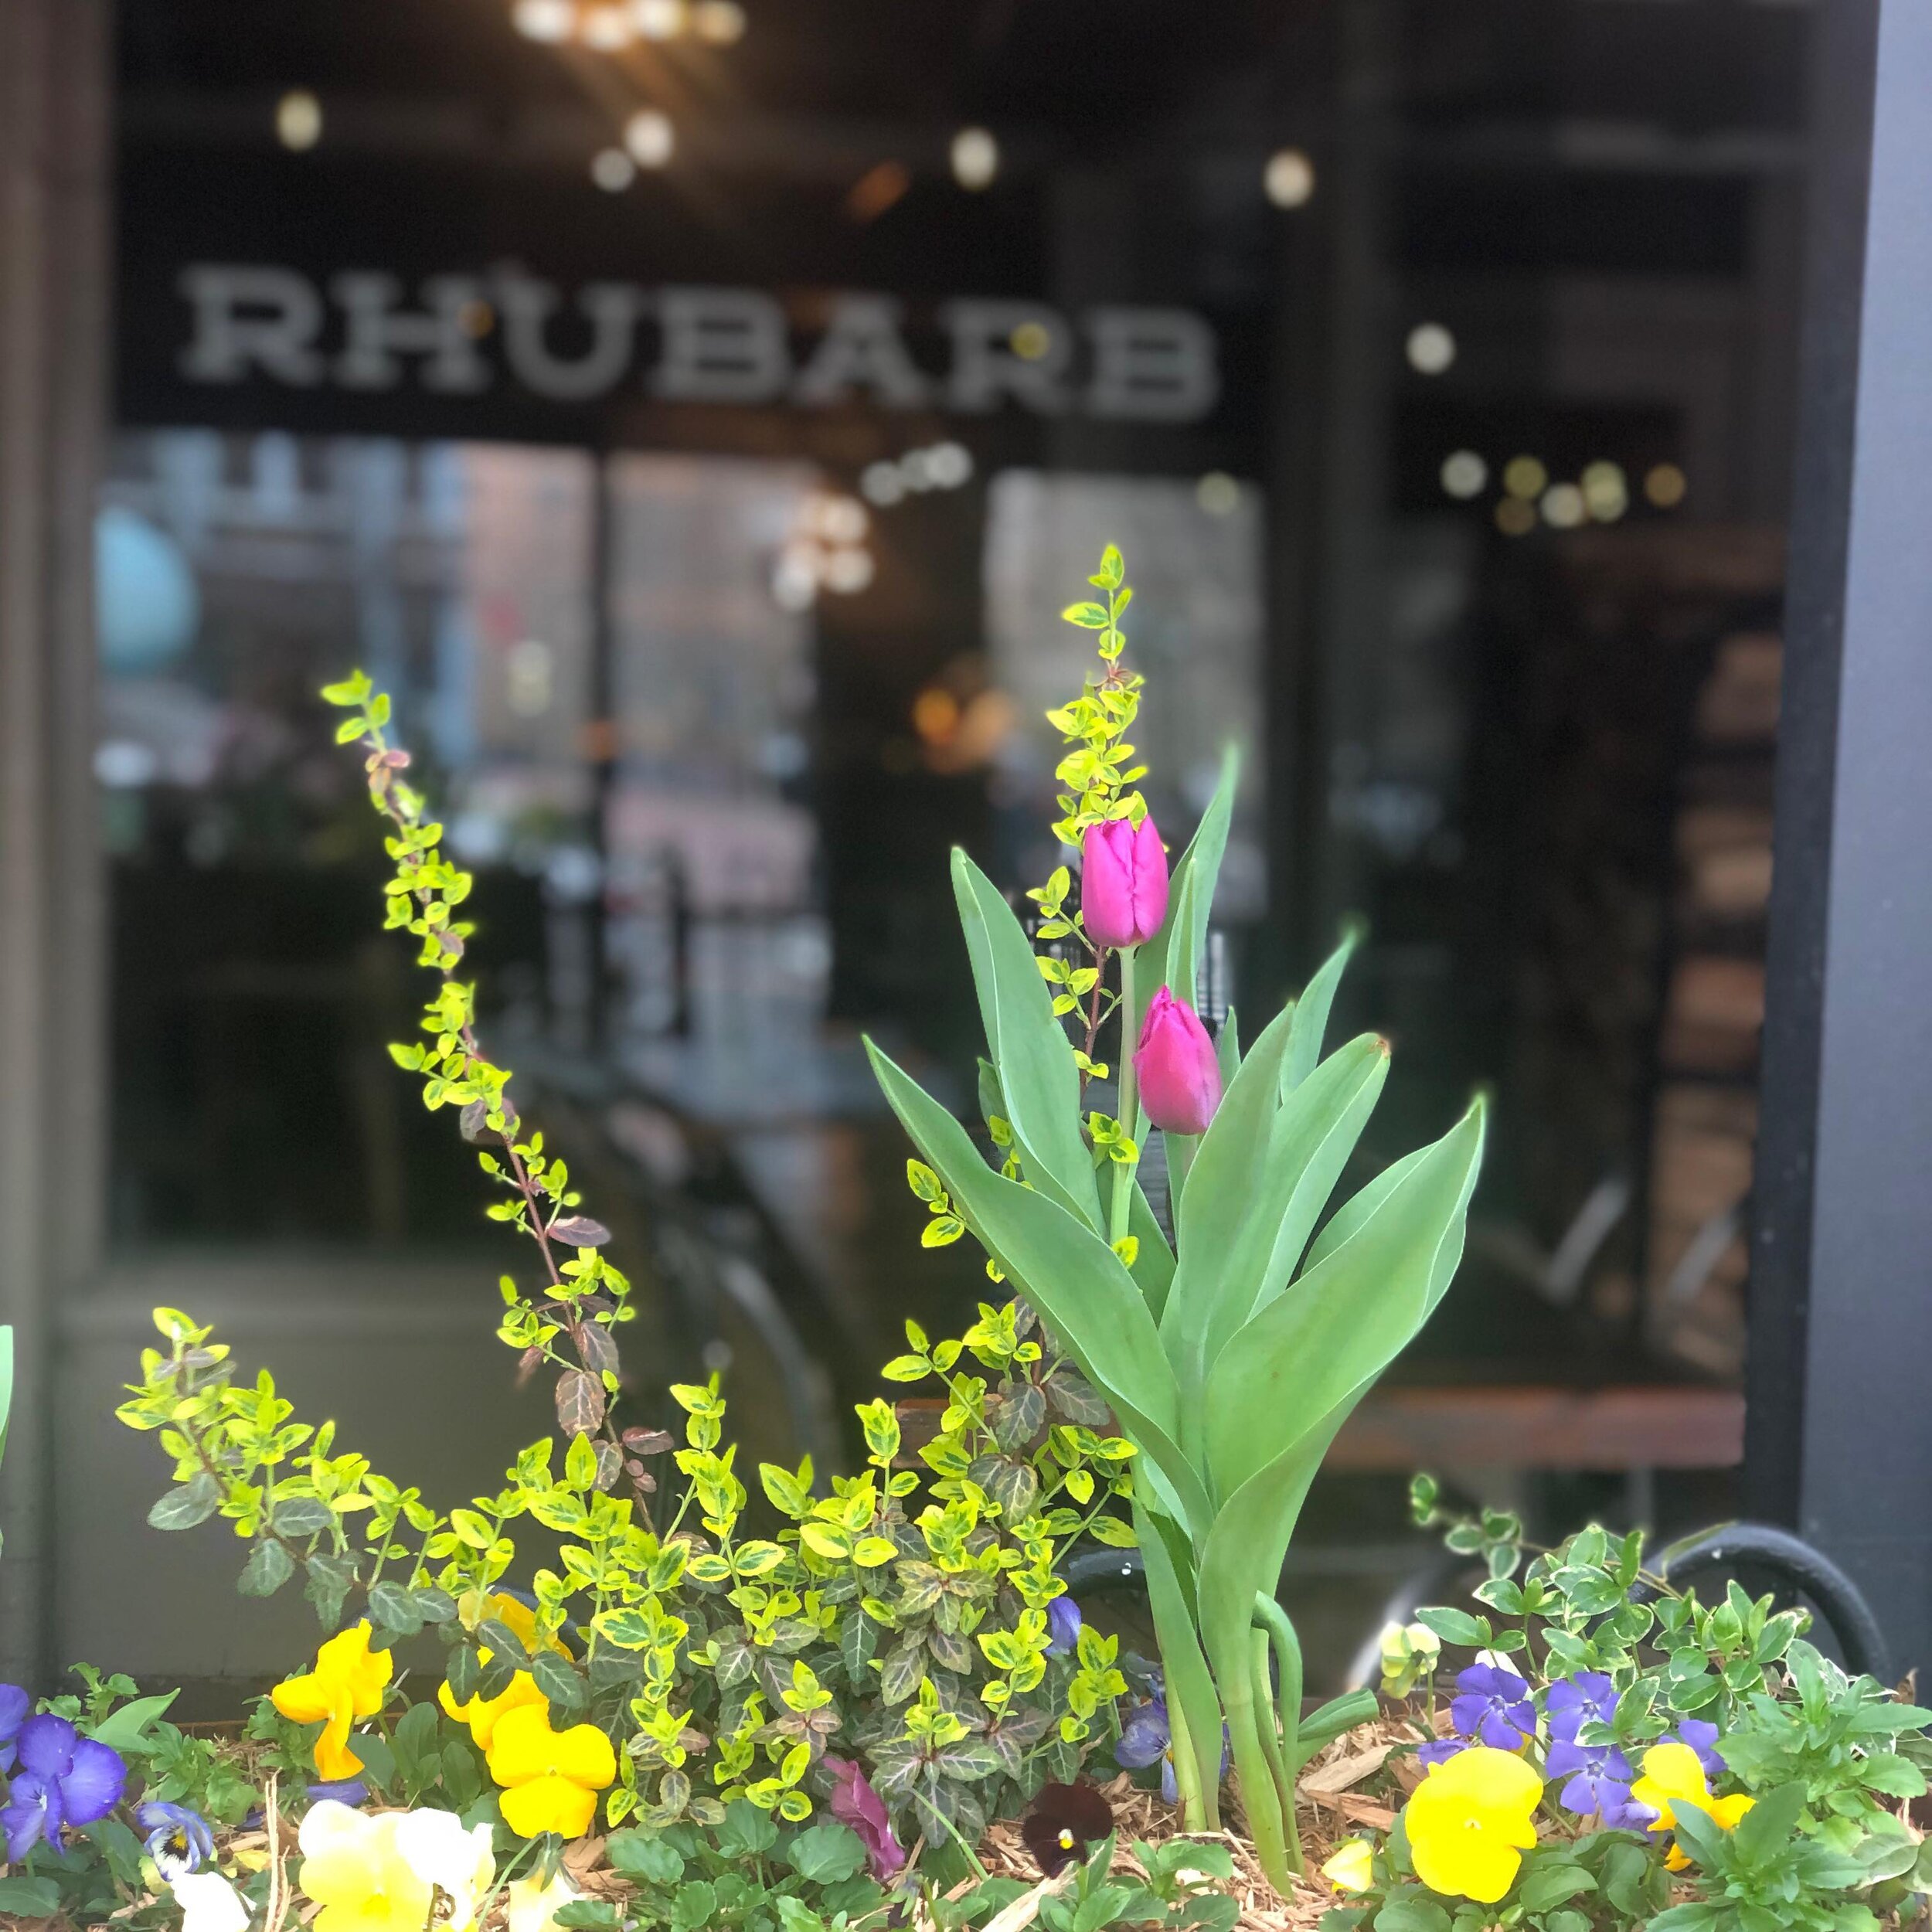 Spring is in bloom 🌷 on the patio, and on our menu!

Whether people watching in Pack Square on our covered patio, beholding the bourbon selection at the bar, or gathered around a table in the dining room, you can enjoy the bounty of the season at Rh